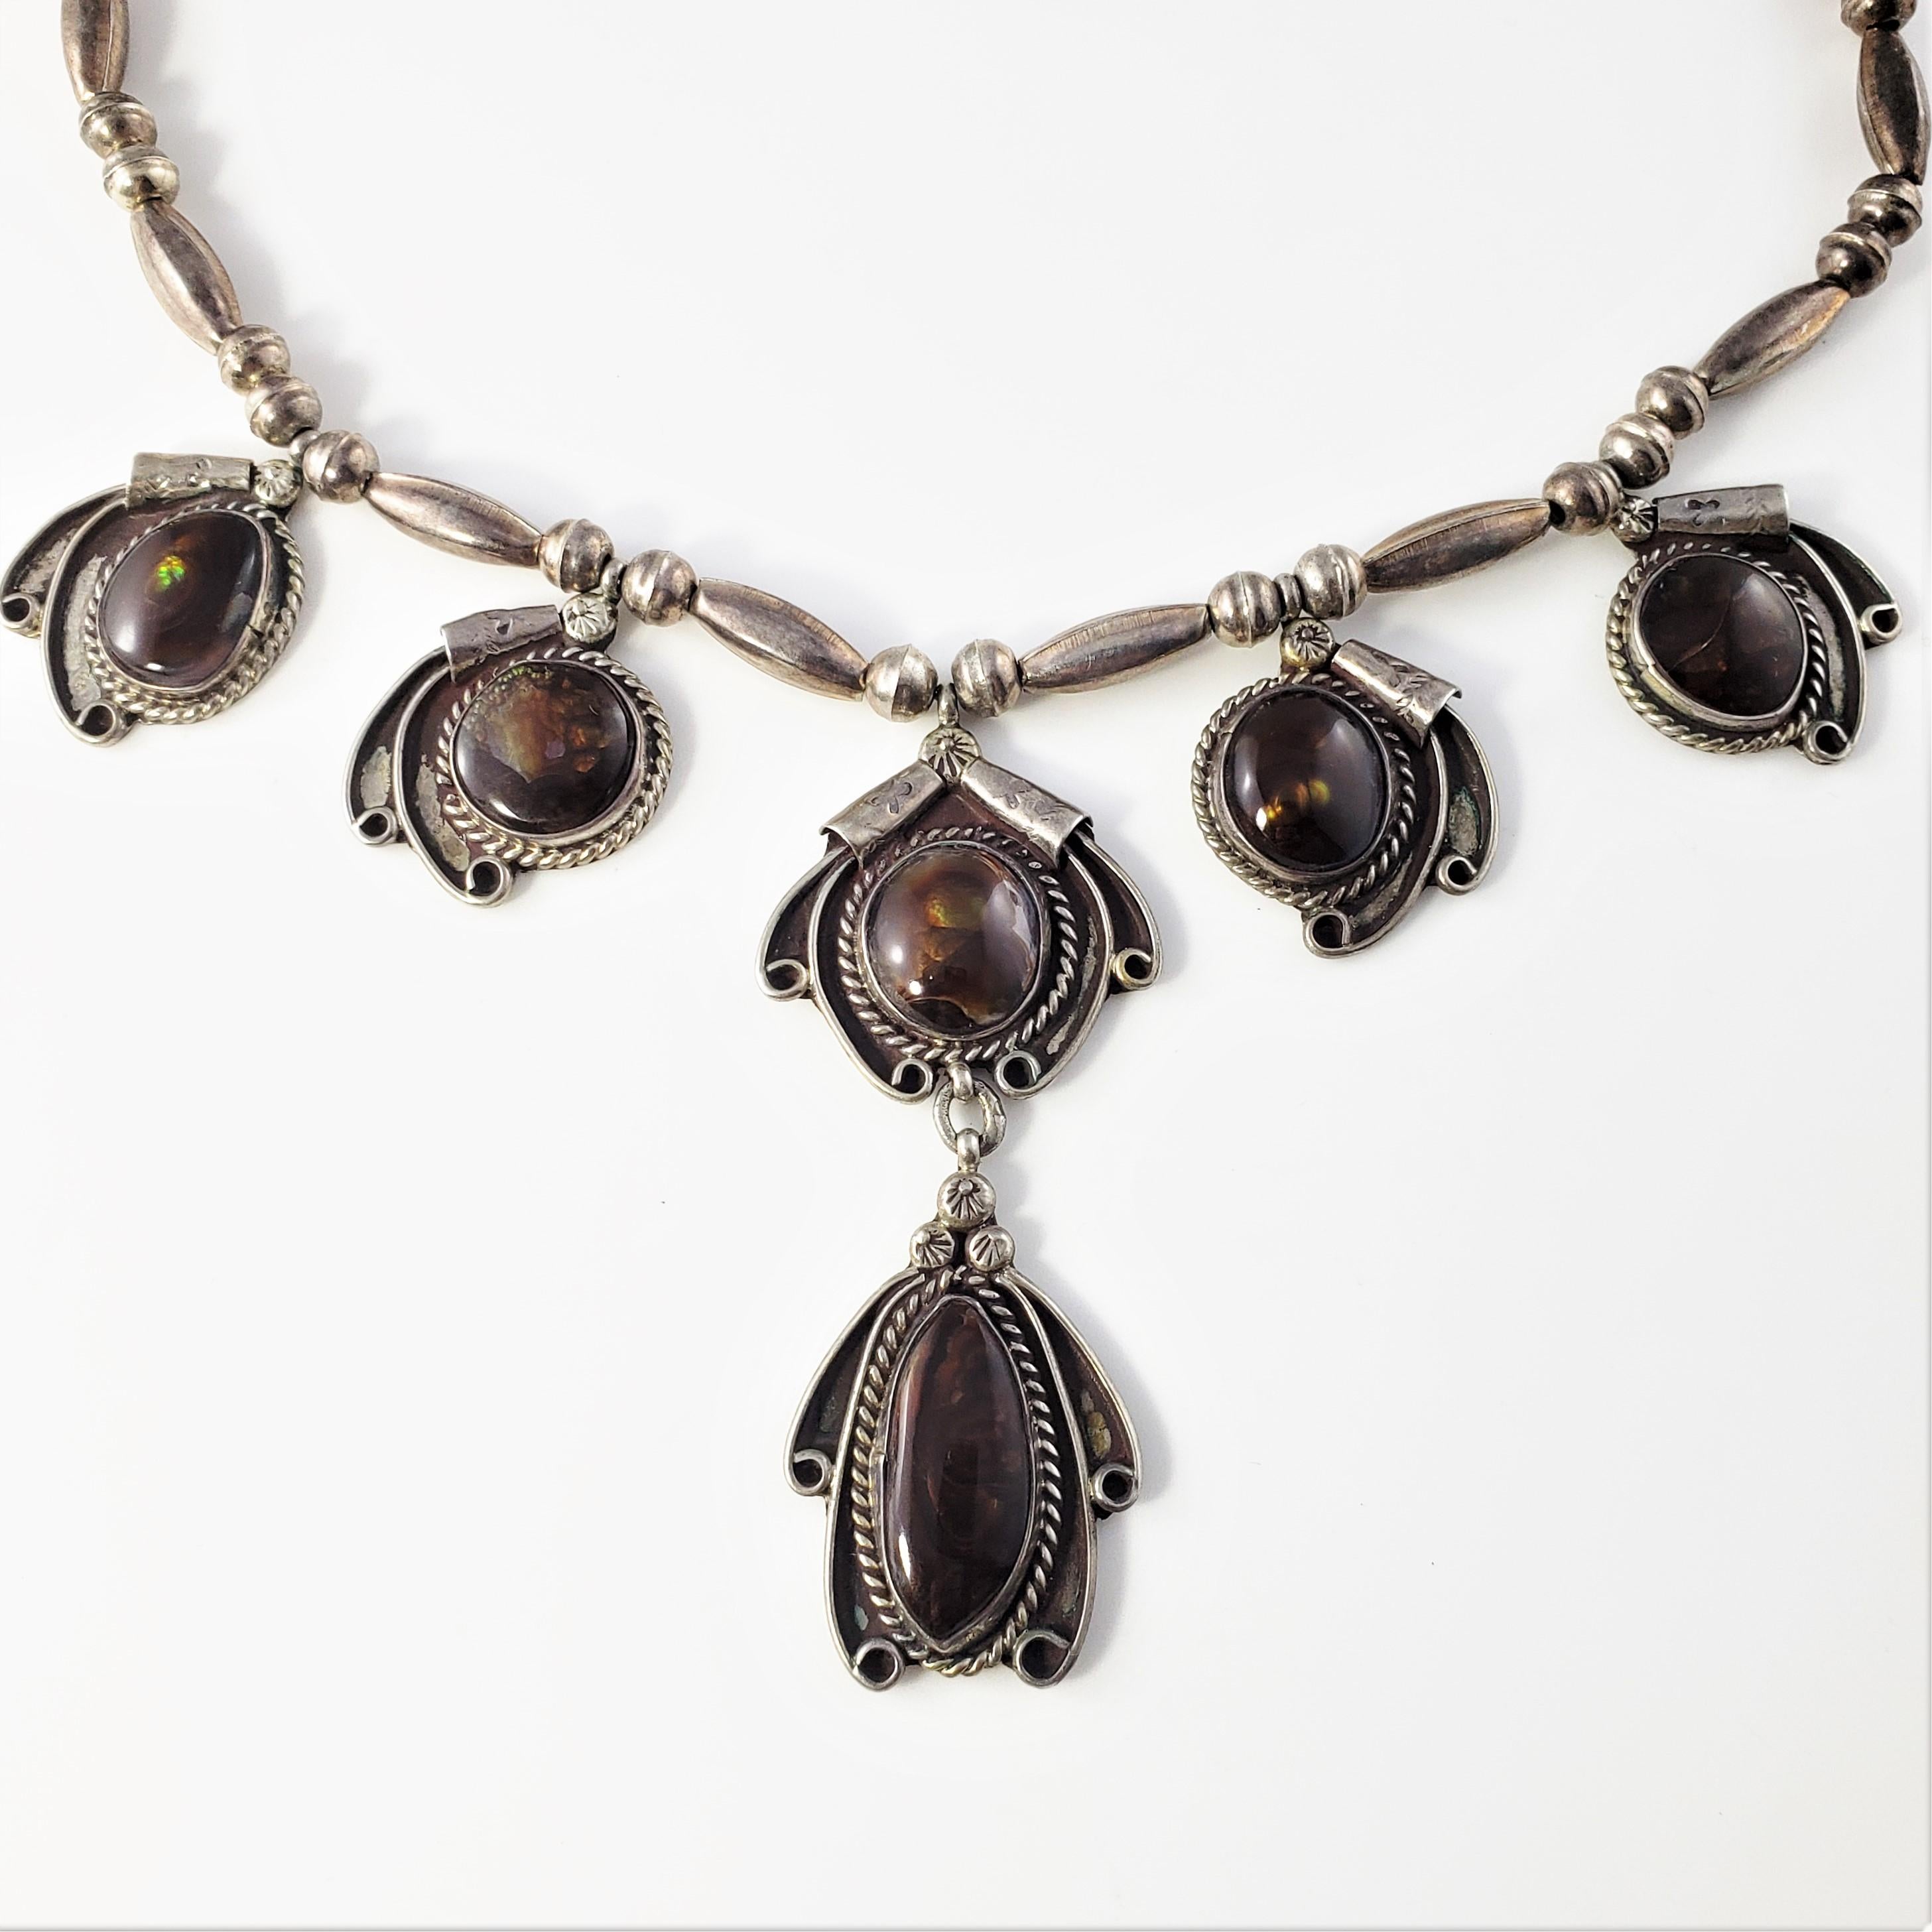 Vintage Native American Squash Blossom Style Sterling Silver Pietersite Necklace-

This lovely Native American necklace features three six pietersite stones (large: 25 mm x 12 mm, smaller stones: 15 mm x 14 mm each)

Size: 17 inches

Center drop: 3